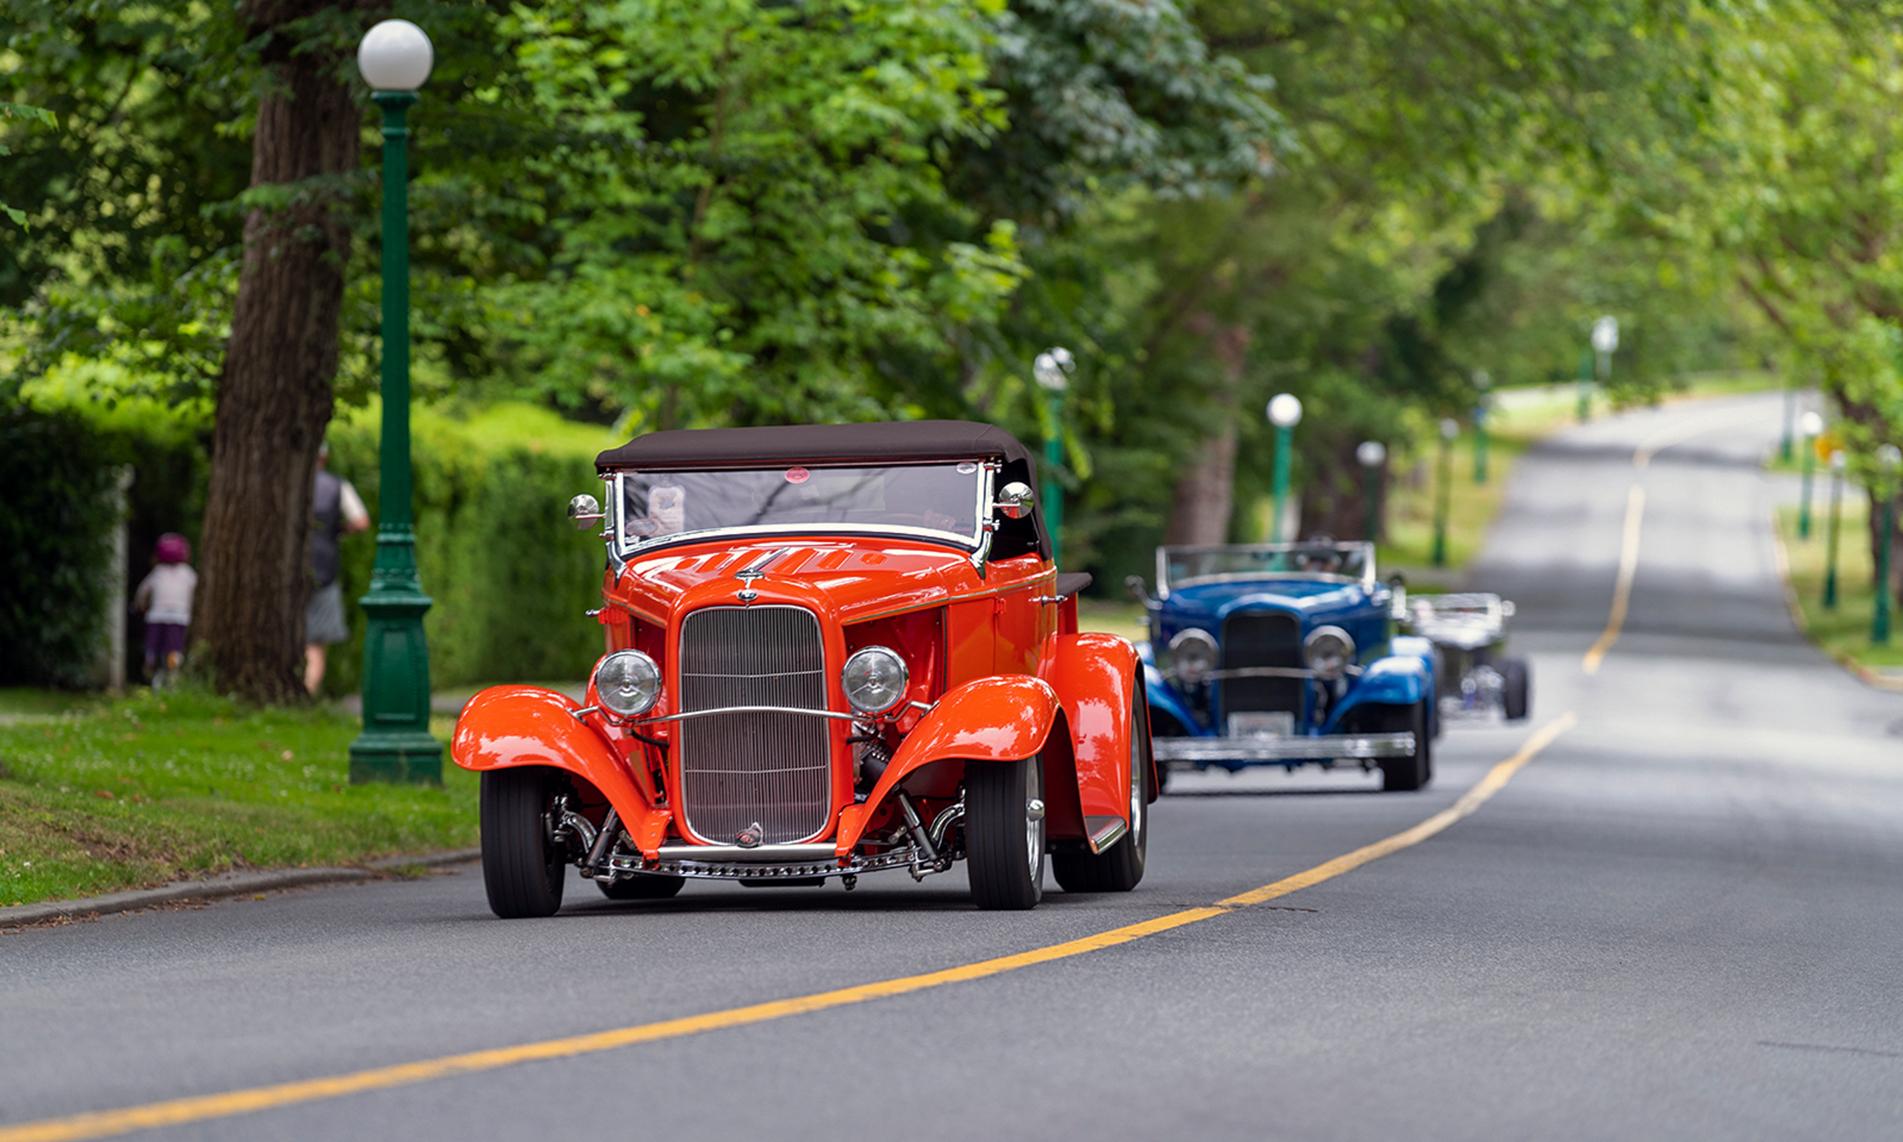 The deuces roll through the streets of Victoria, BC